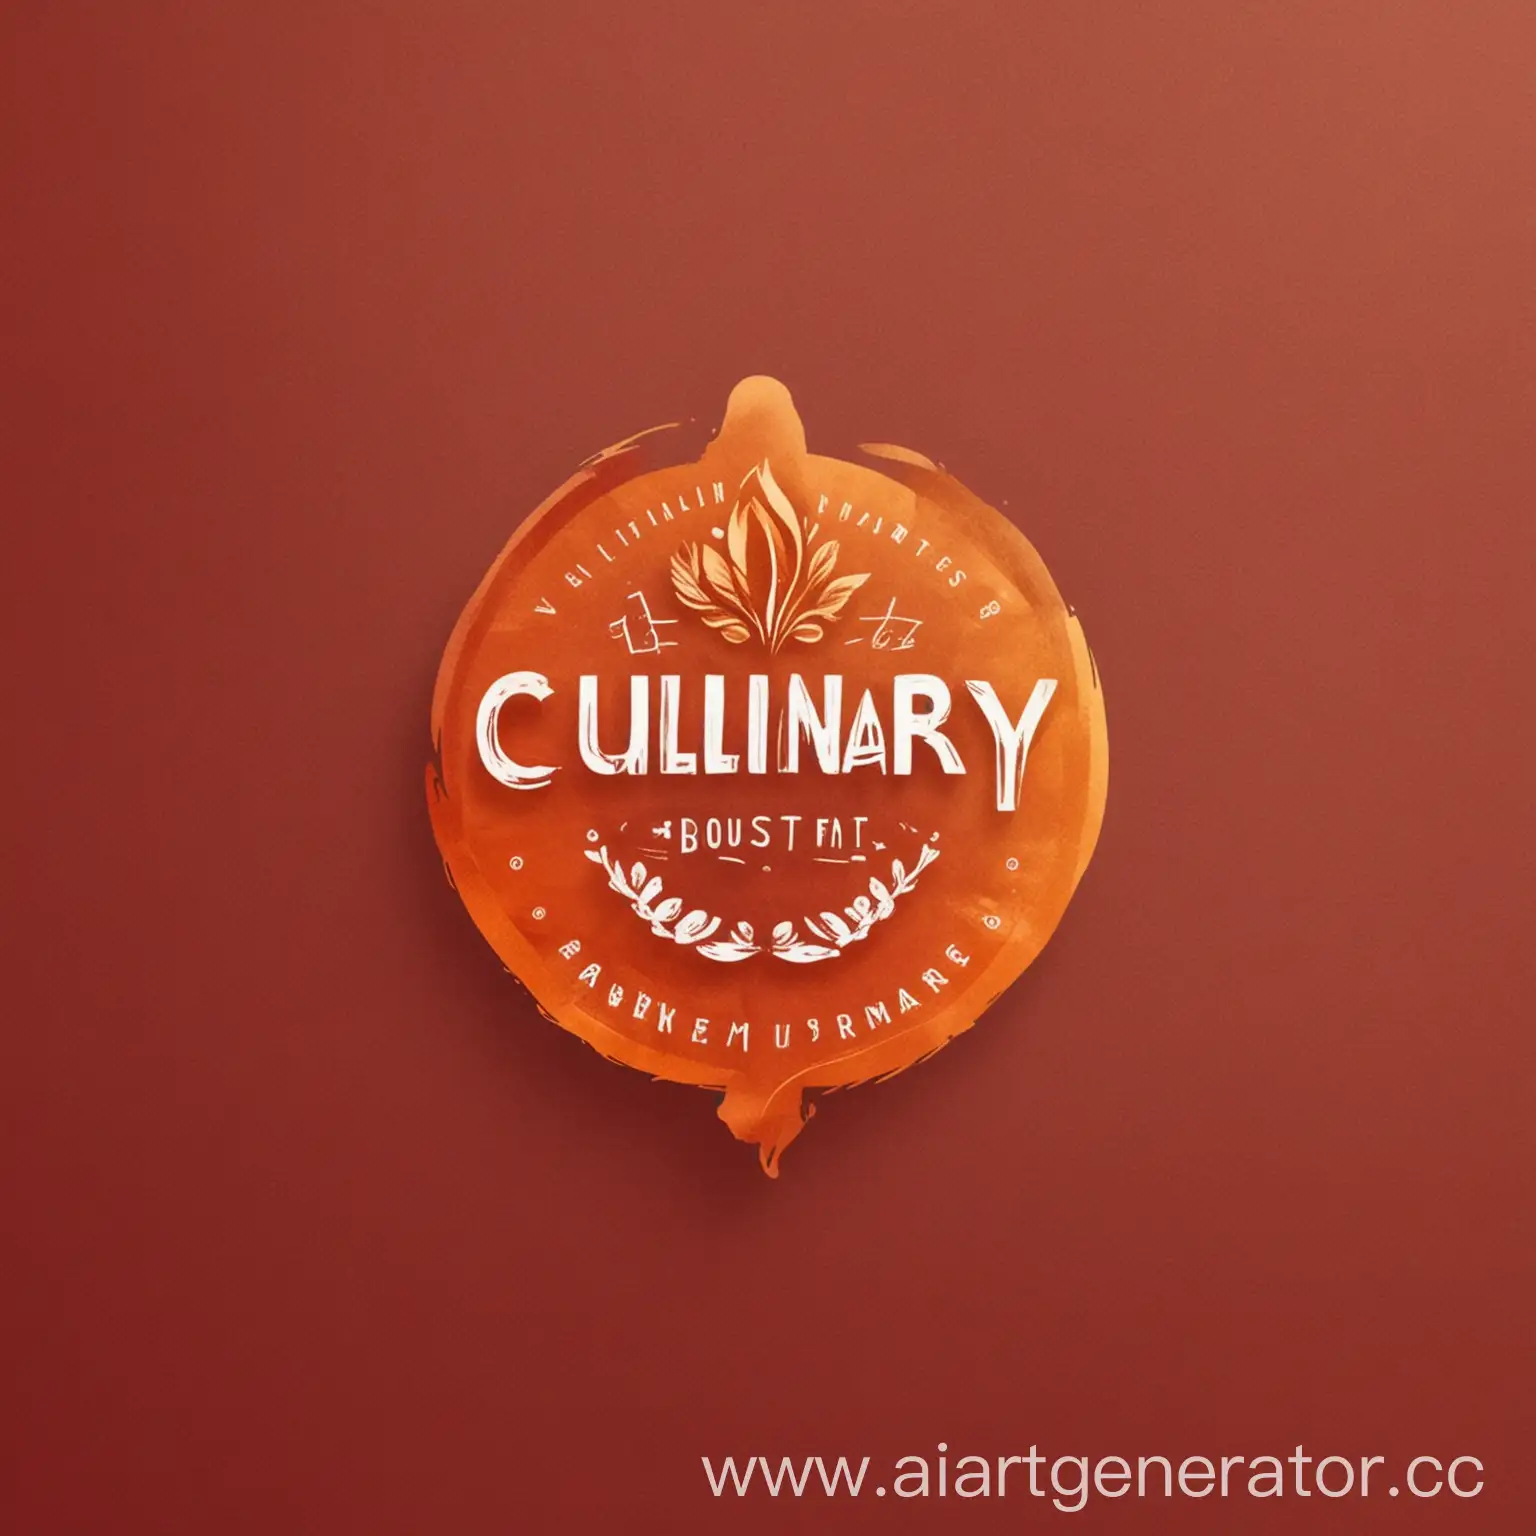 WarmToned-Culinary-Website-Logo-with-Utensils-and-Fresh-Ingredients